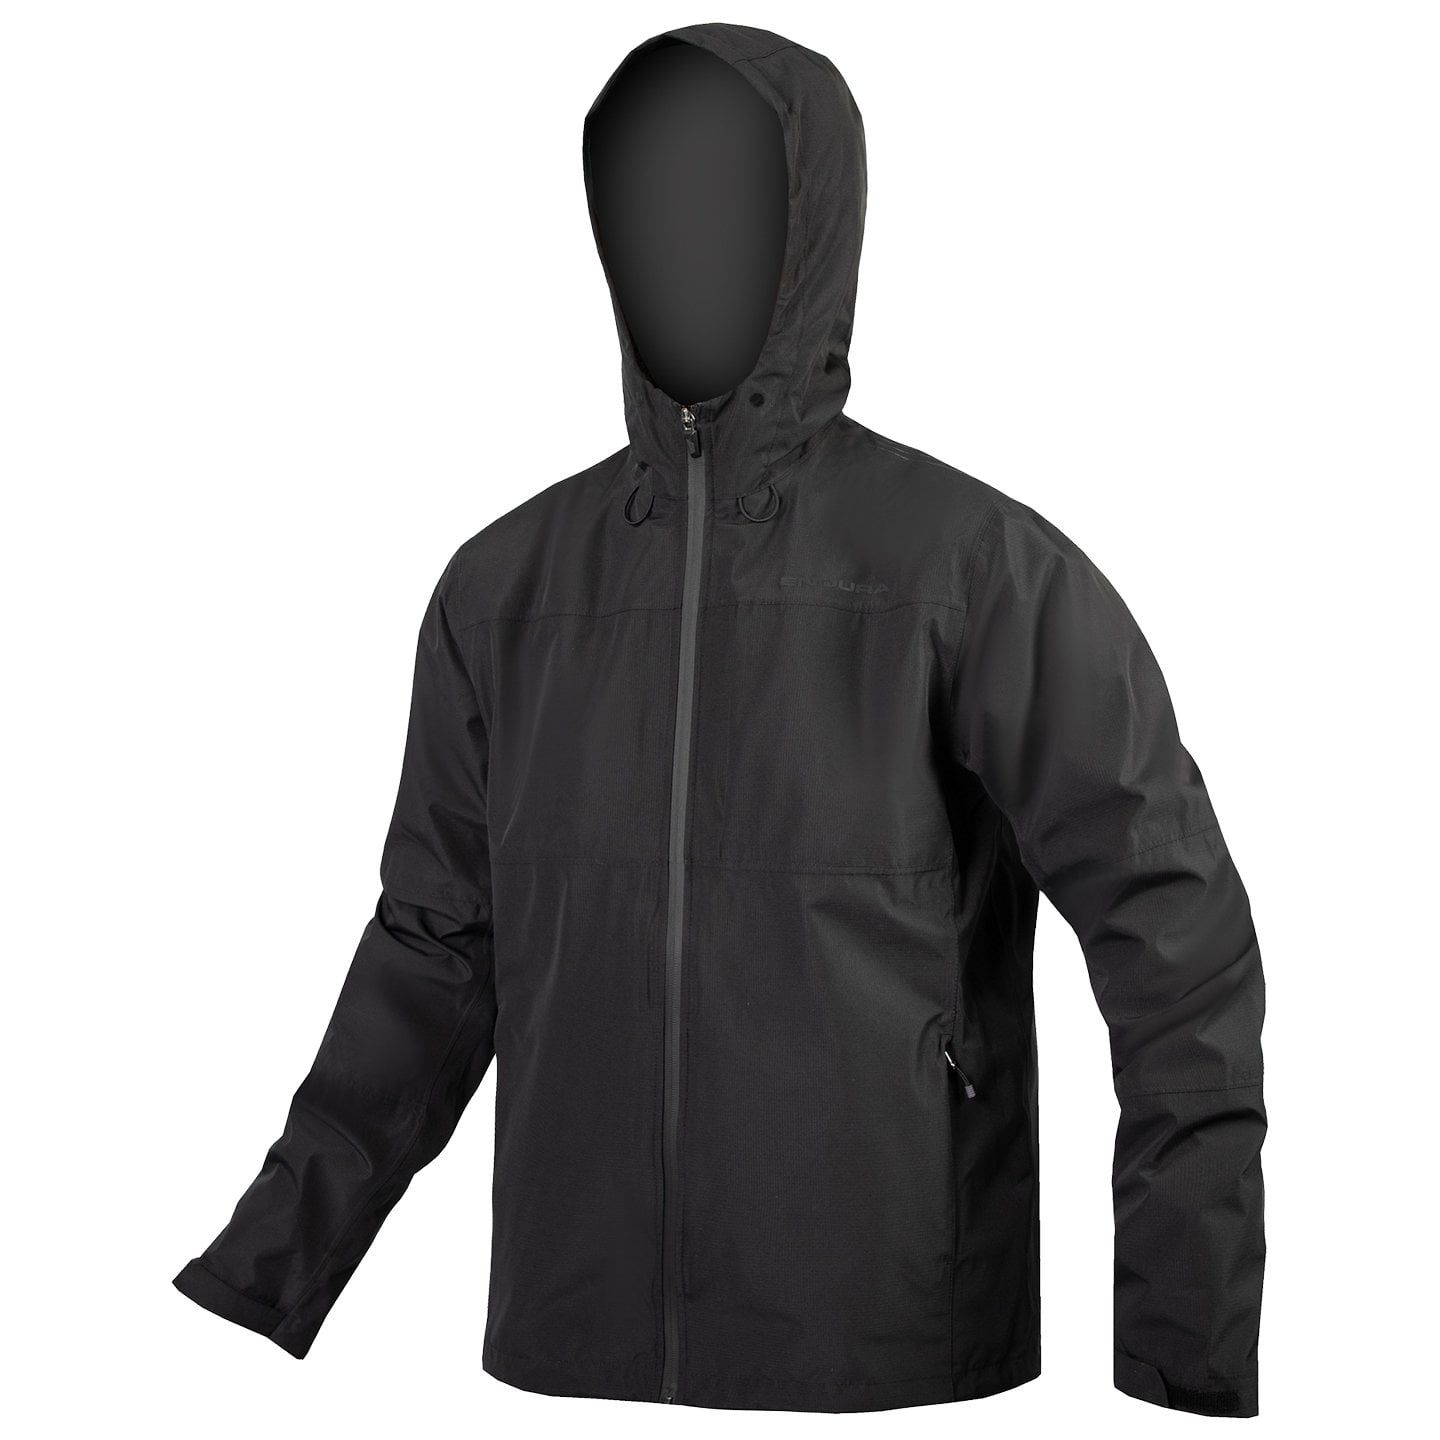 ENDURA Hummvee 3 in 1 Multifunctional Jacket, for men, size 2XL, Cycle jacket, Cycling clothing